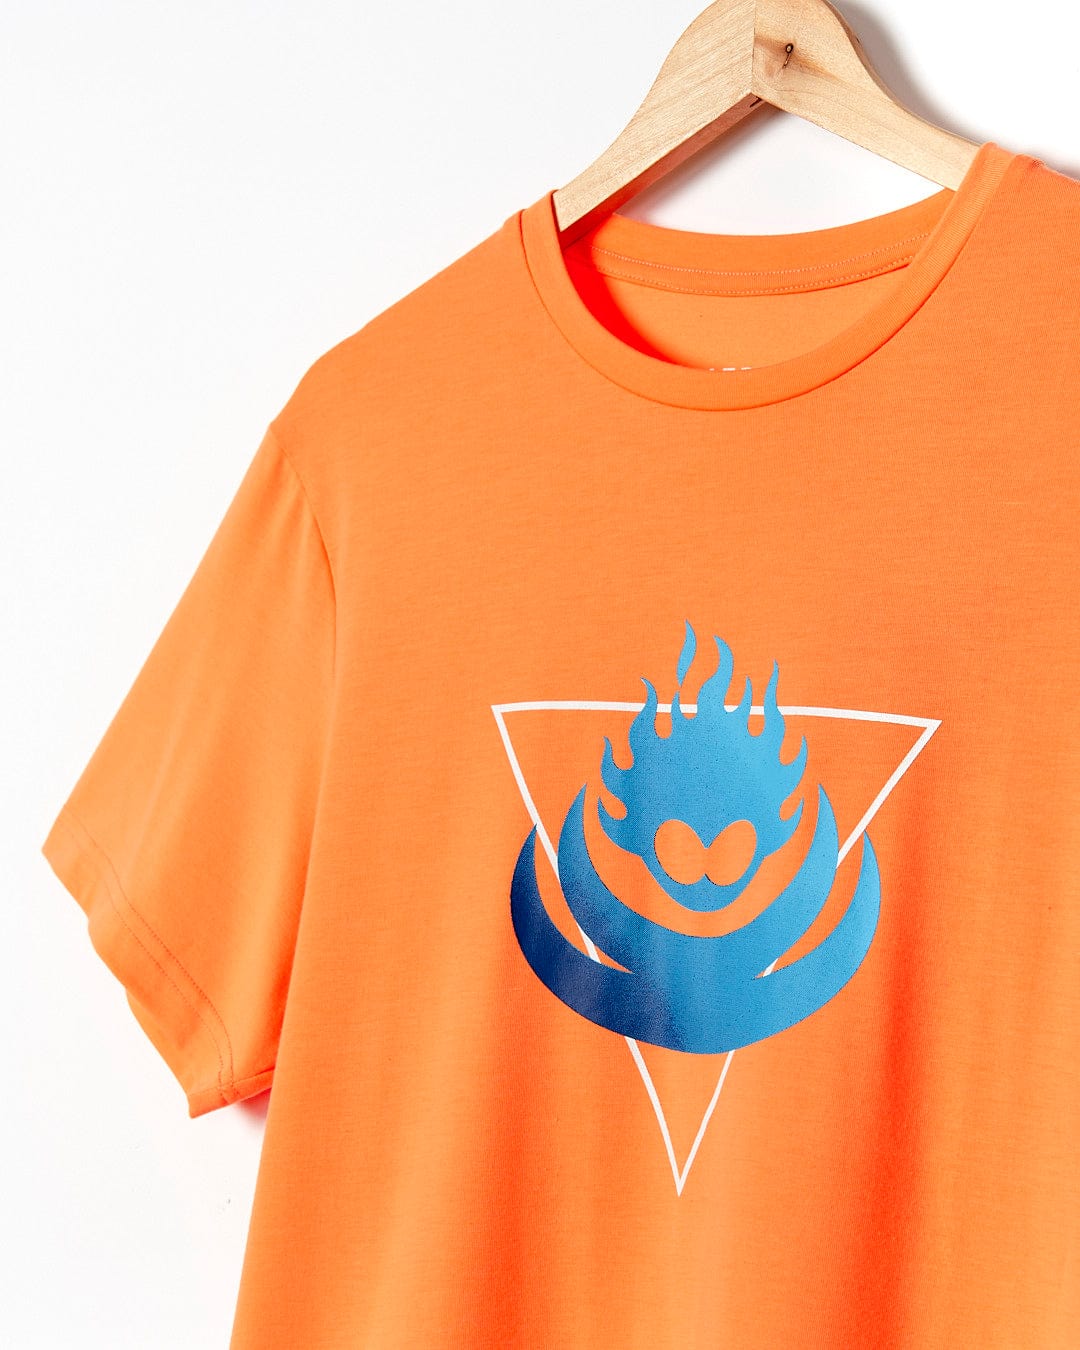 A Flame Tri - Mens Recycled Short Sleeve T-Shirt - Light Orange by Saltrock with a blue flame on it.